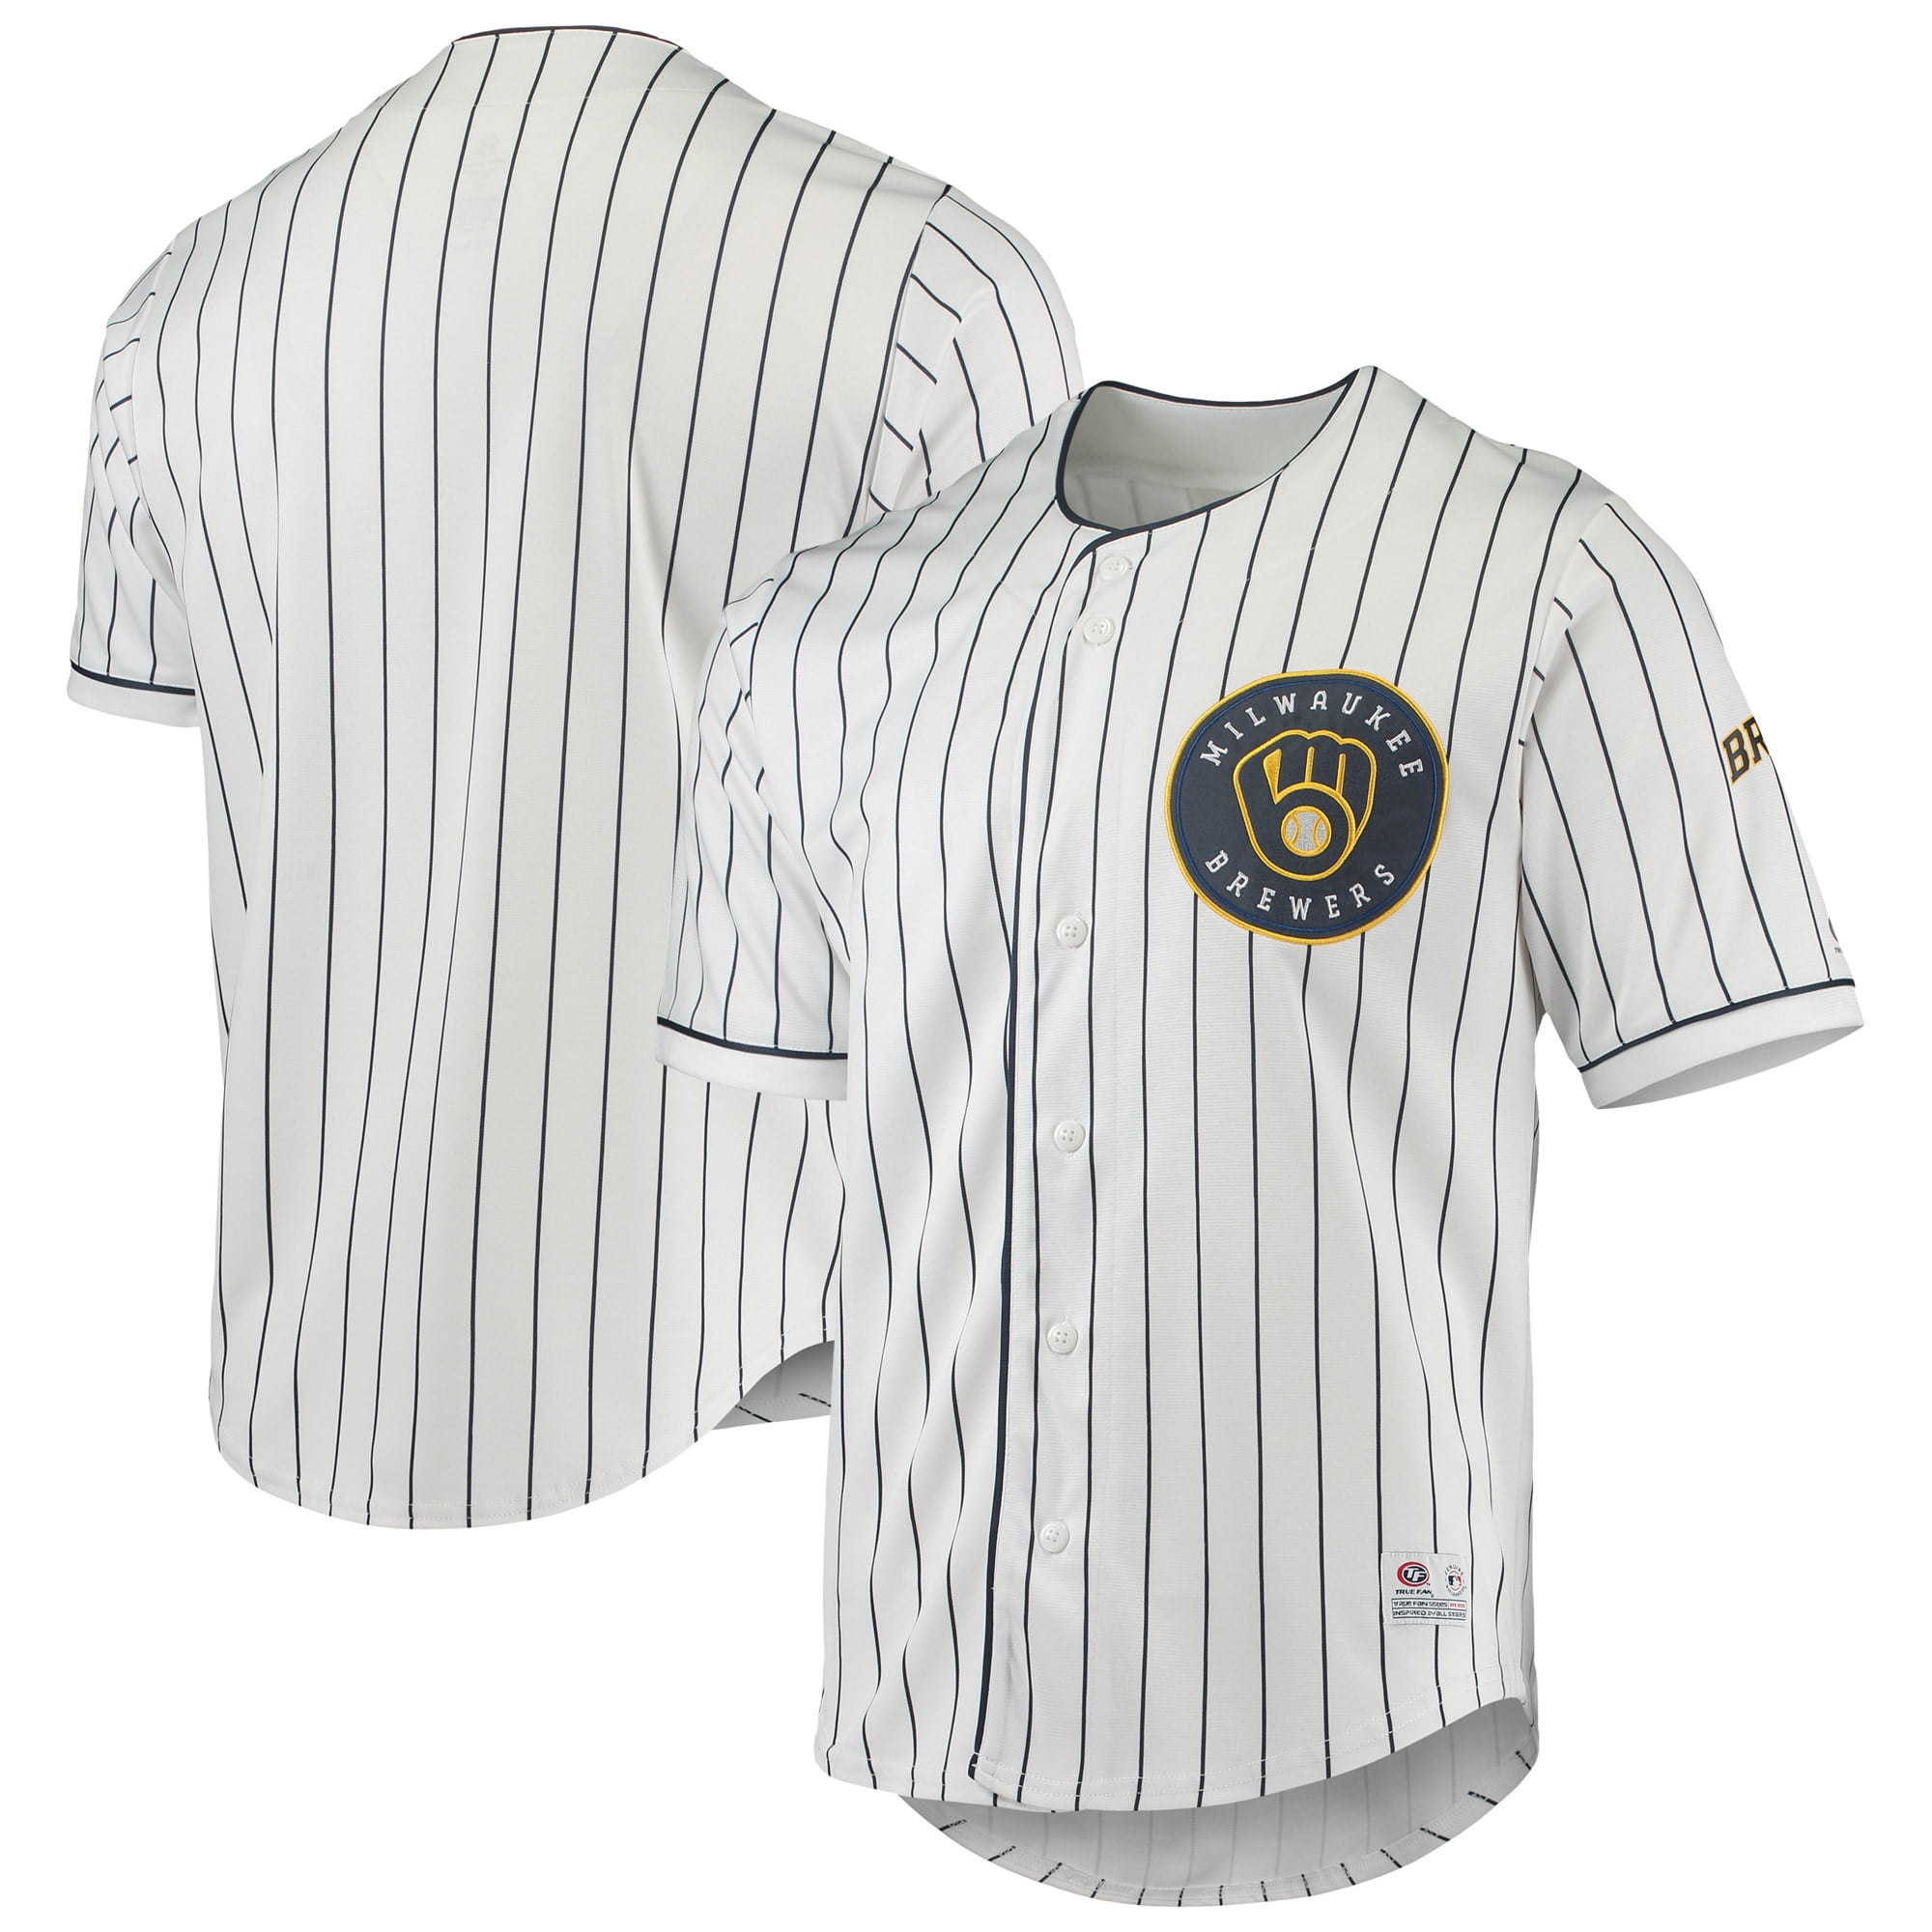 brewers soccer jersey